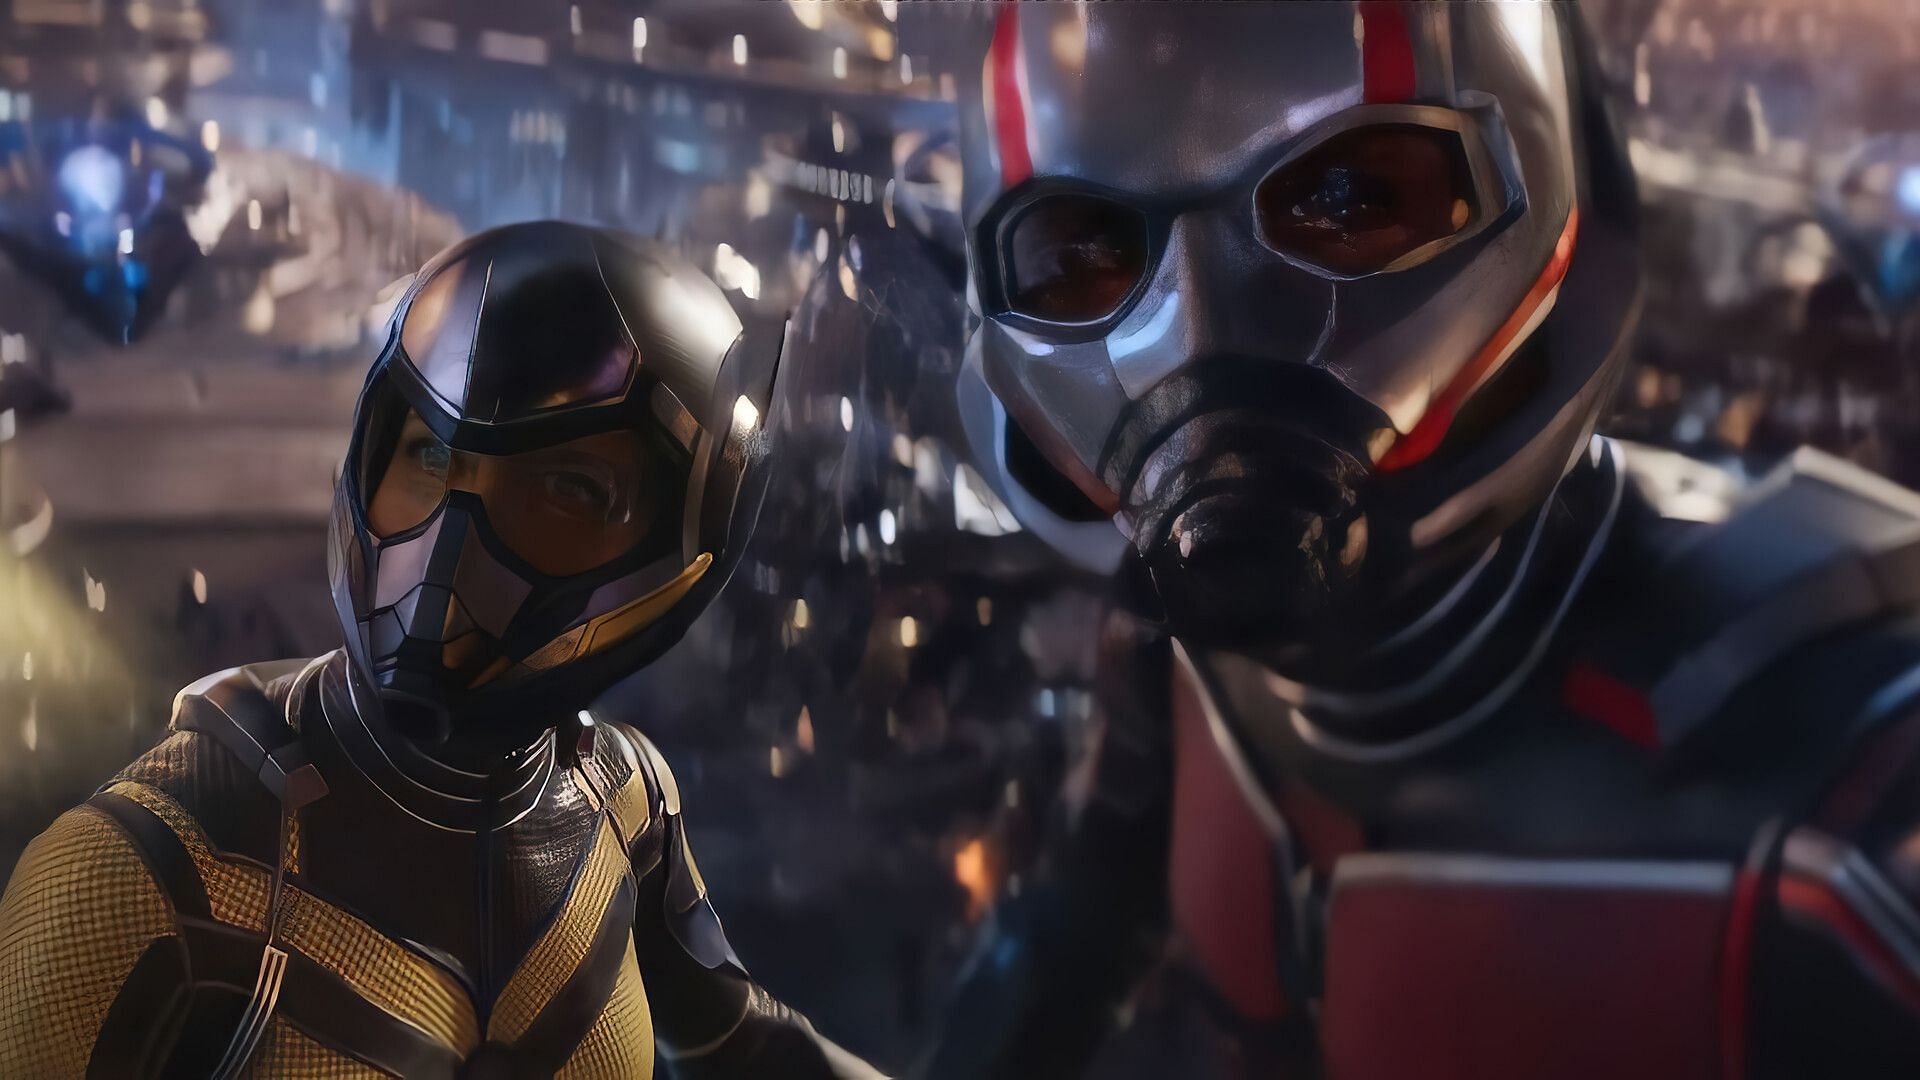 Ant-Man and Wasp in Ant-Man and the Wasp: Quantumania (Image Credit: Marvel Studios)